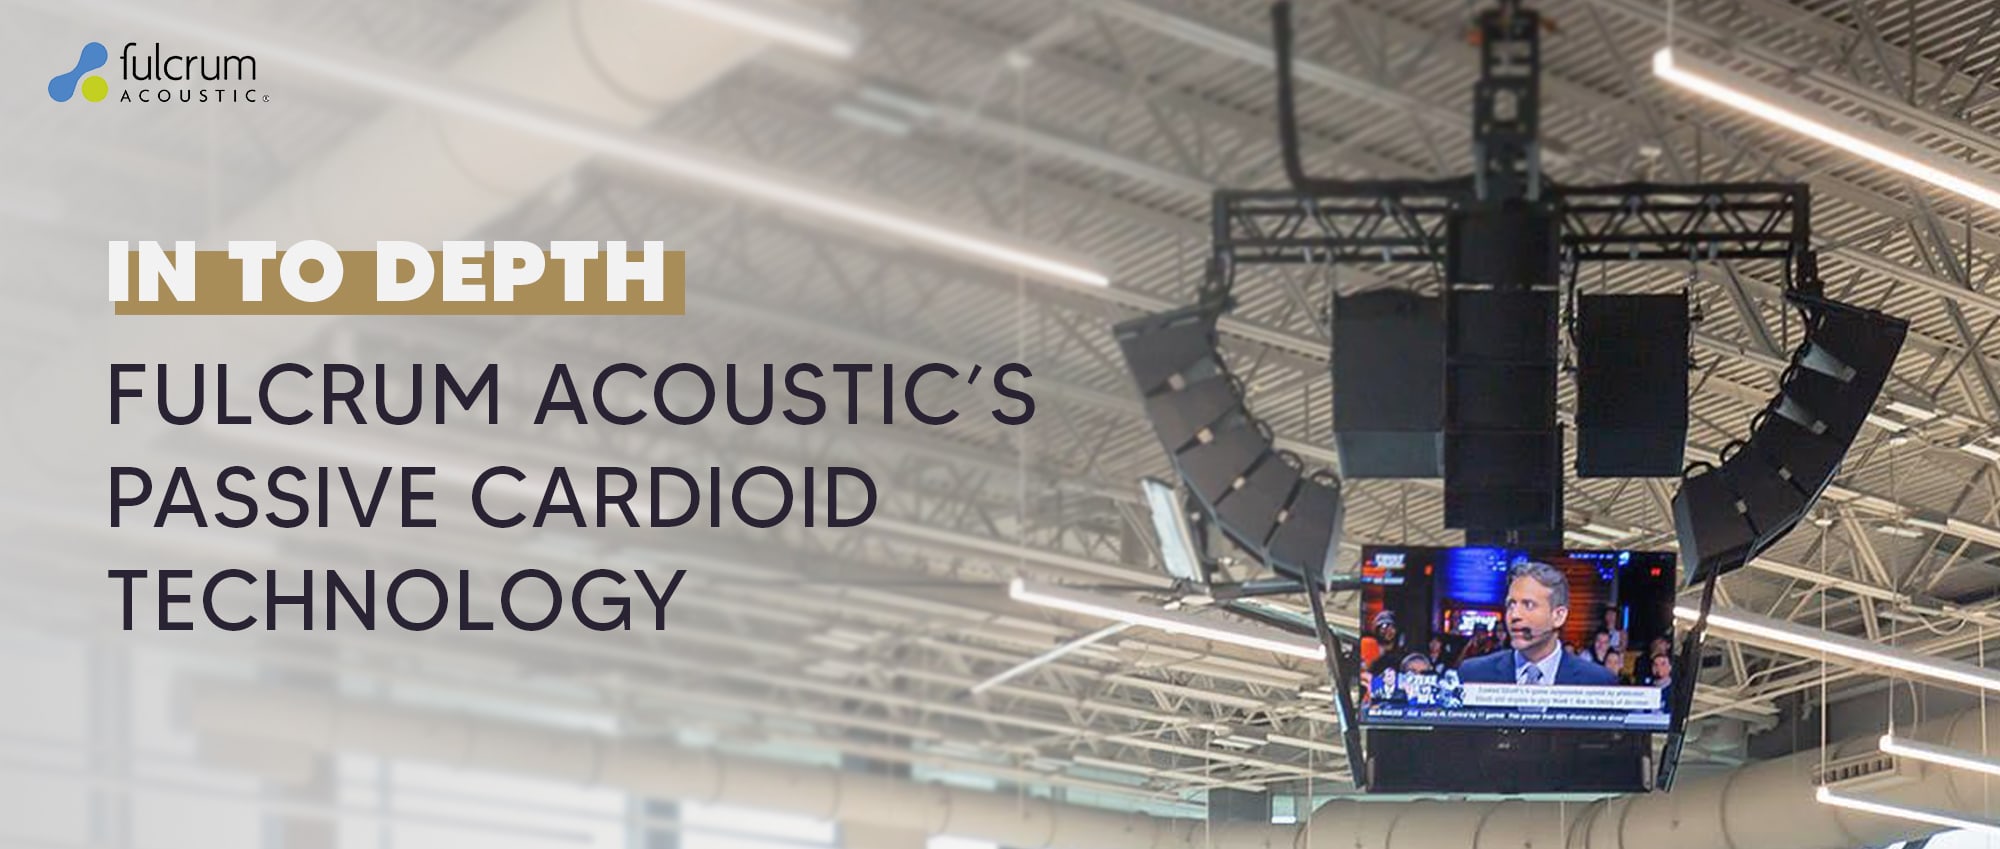 In To Depth: Fulcrum Acoustic And Its Passive Cardioid Technology™ 1